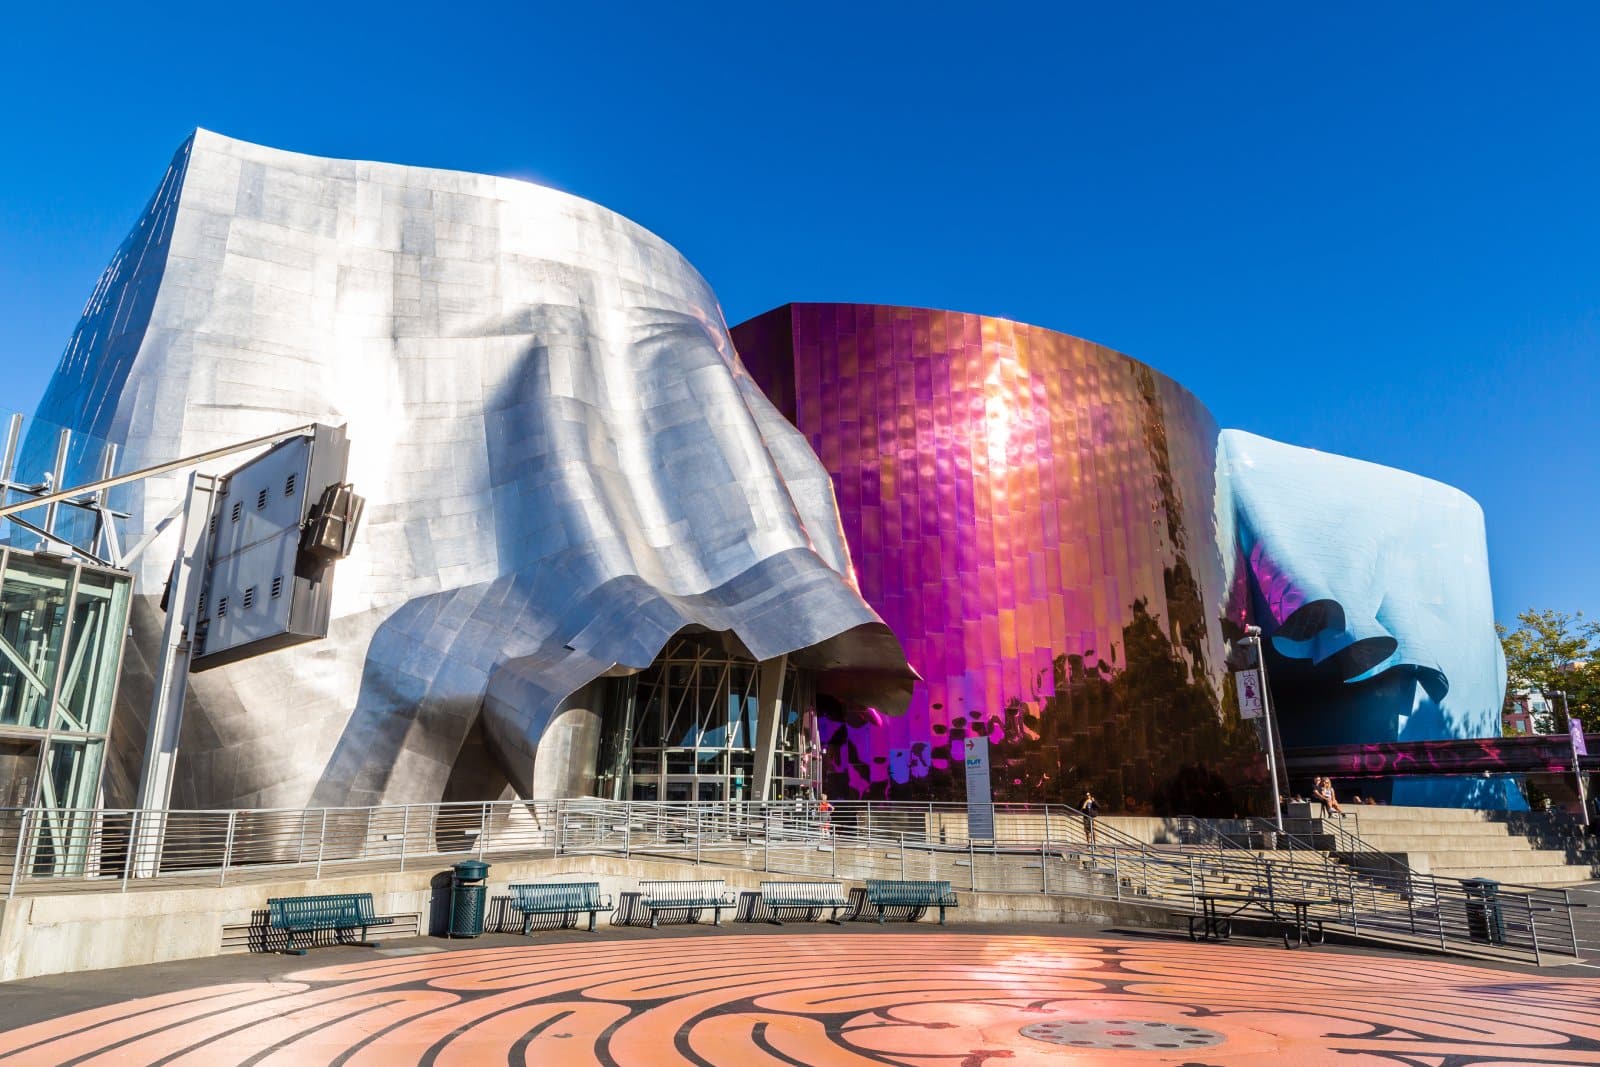 <p class="wp-caption-text">Image Credit: Shutterstock / Sergii Figurnyi</p>  <p><span>The Experience Music Project, now known as MoPOP (Museum of Pop Culture), in Seattle, Washington, is a leading-edge museum dedicated to the ideas and risk-taking that fuel contemporary popular culture. With its roots deeply embedded in the city’s rich musical history, the museum offers immersive exhibits on rock ‘n’ roll, science fiction, and much more. Music enthusiasts can delve into the world of Jimi Hendrix, Nirvana, and the grunge movement that put Seattle on the musical map. The museum’s architecture, designed by Frank Gehry, is a visual masterpiece, symbolizing the creativity and innovation that the museum celebrates.</span></p>